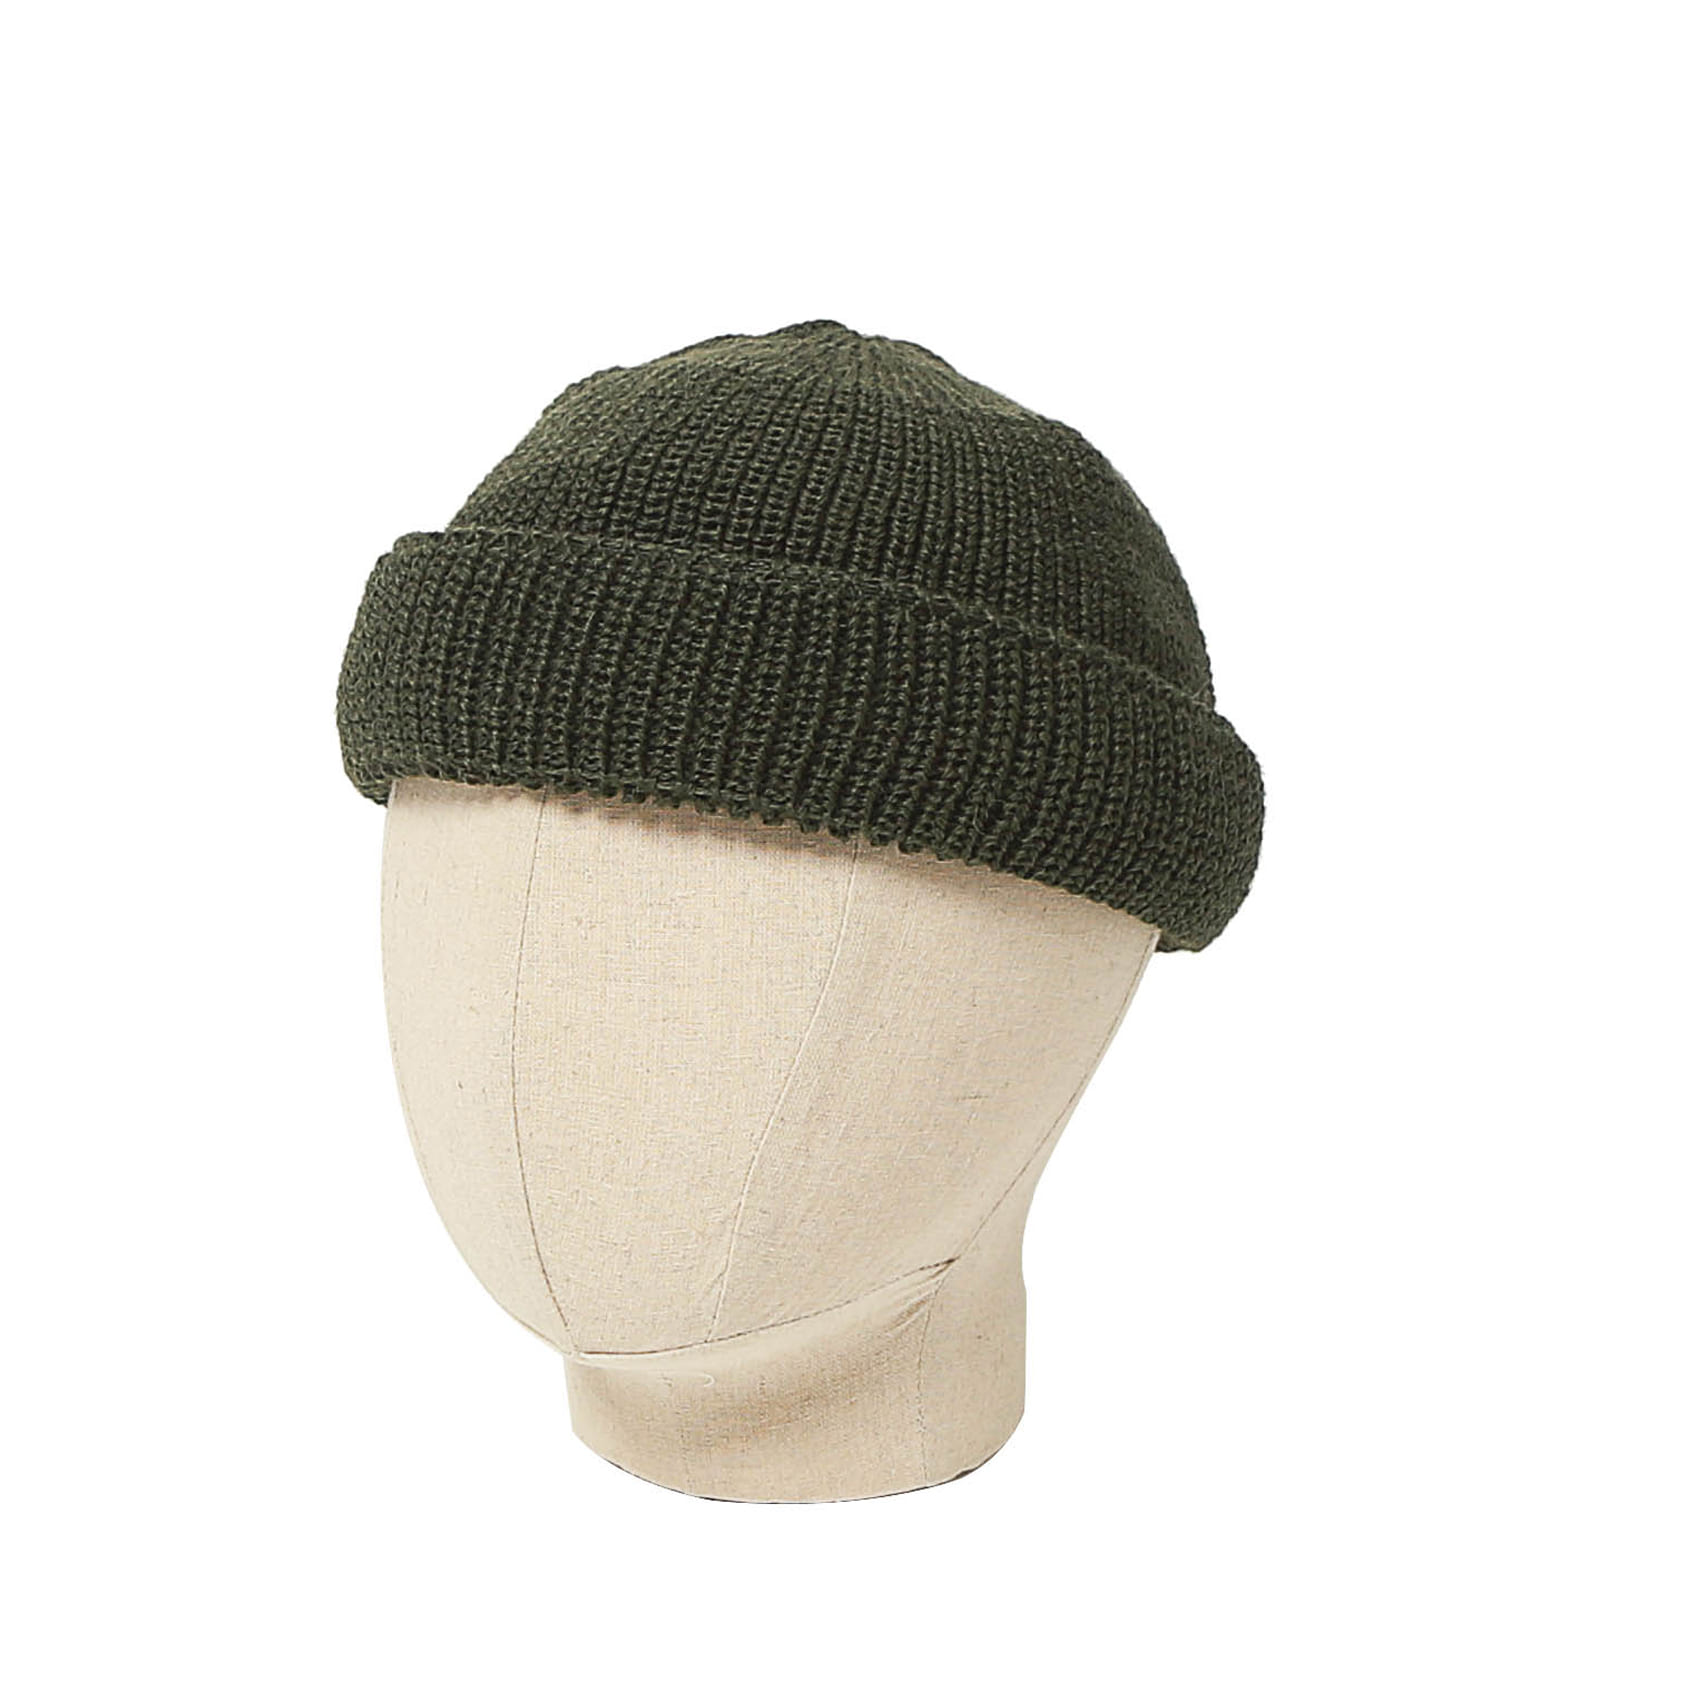 DECK HAT - MILITARY GREEN